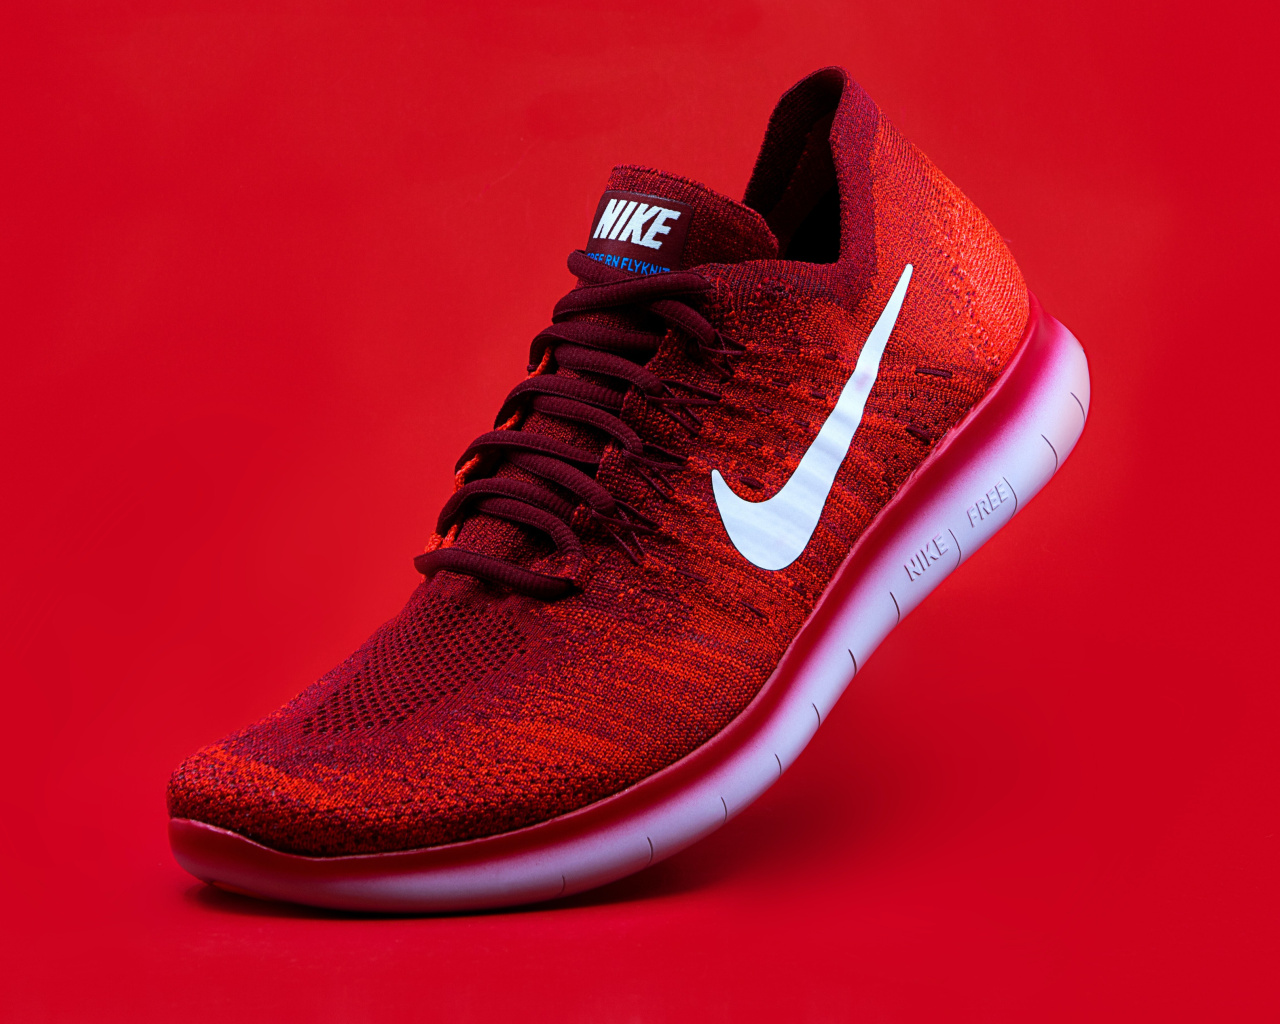 Red Nike Shoes wallpaper 1280x1024